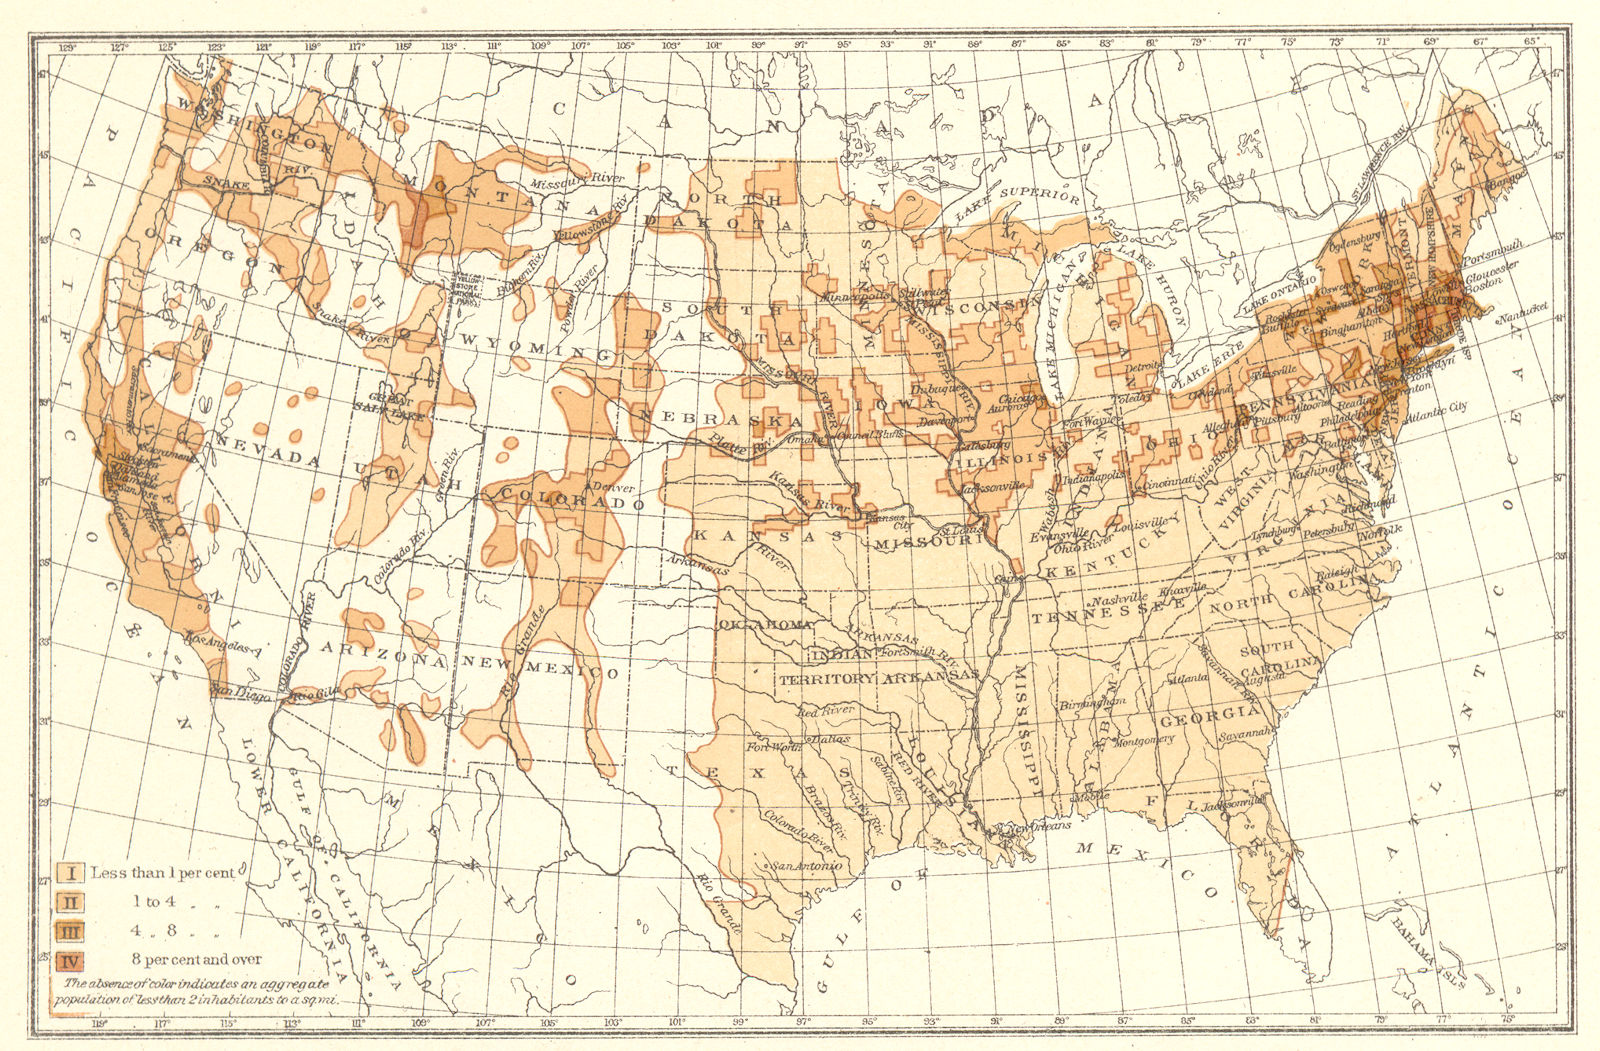 Associate Product USA. Proportion of natives Ireland to total population.  1900 old antique map